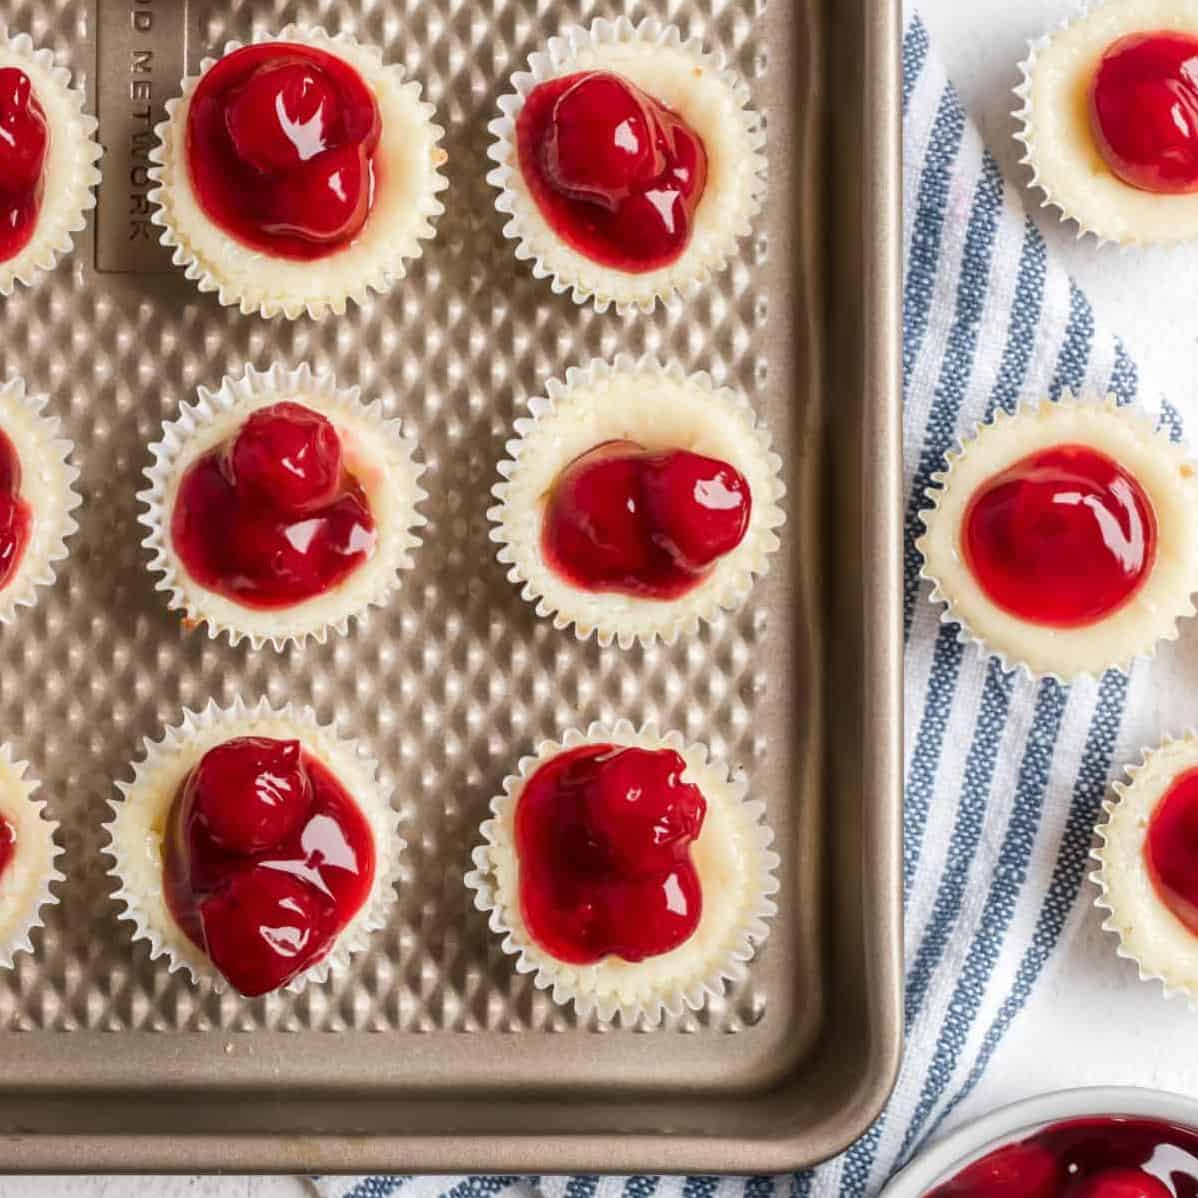  Precious little tarts dusted with a sprinkle of powdered sugar and topped with a bright red cherry